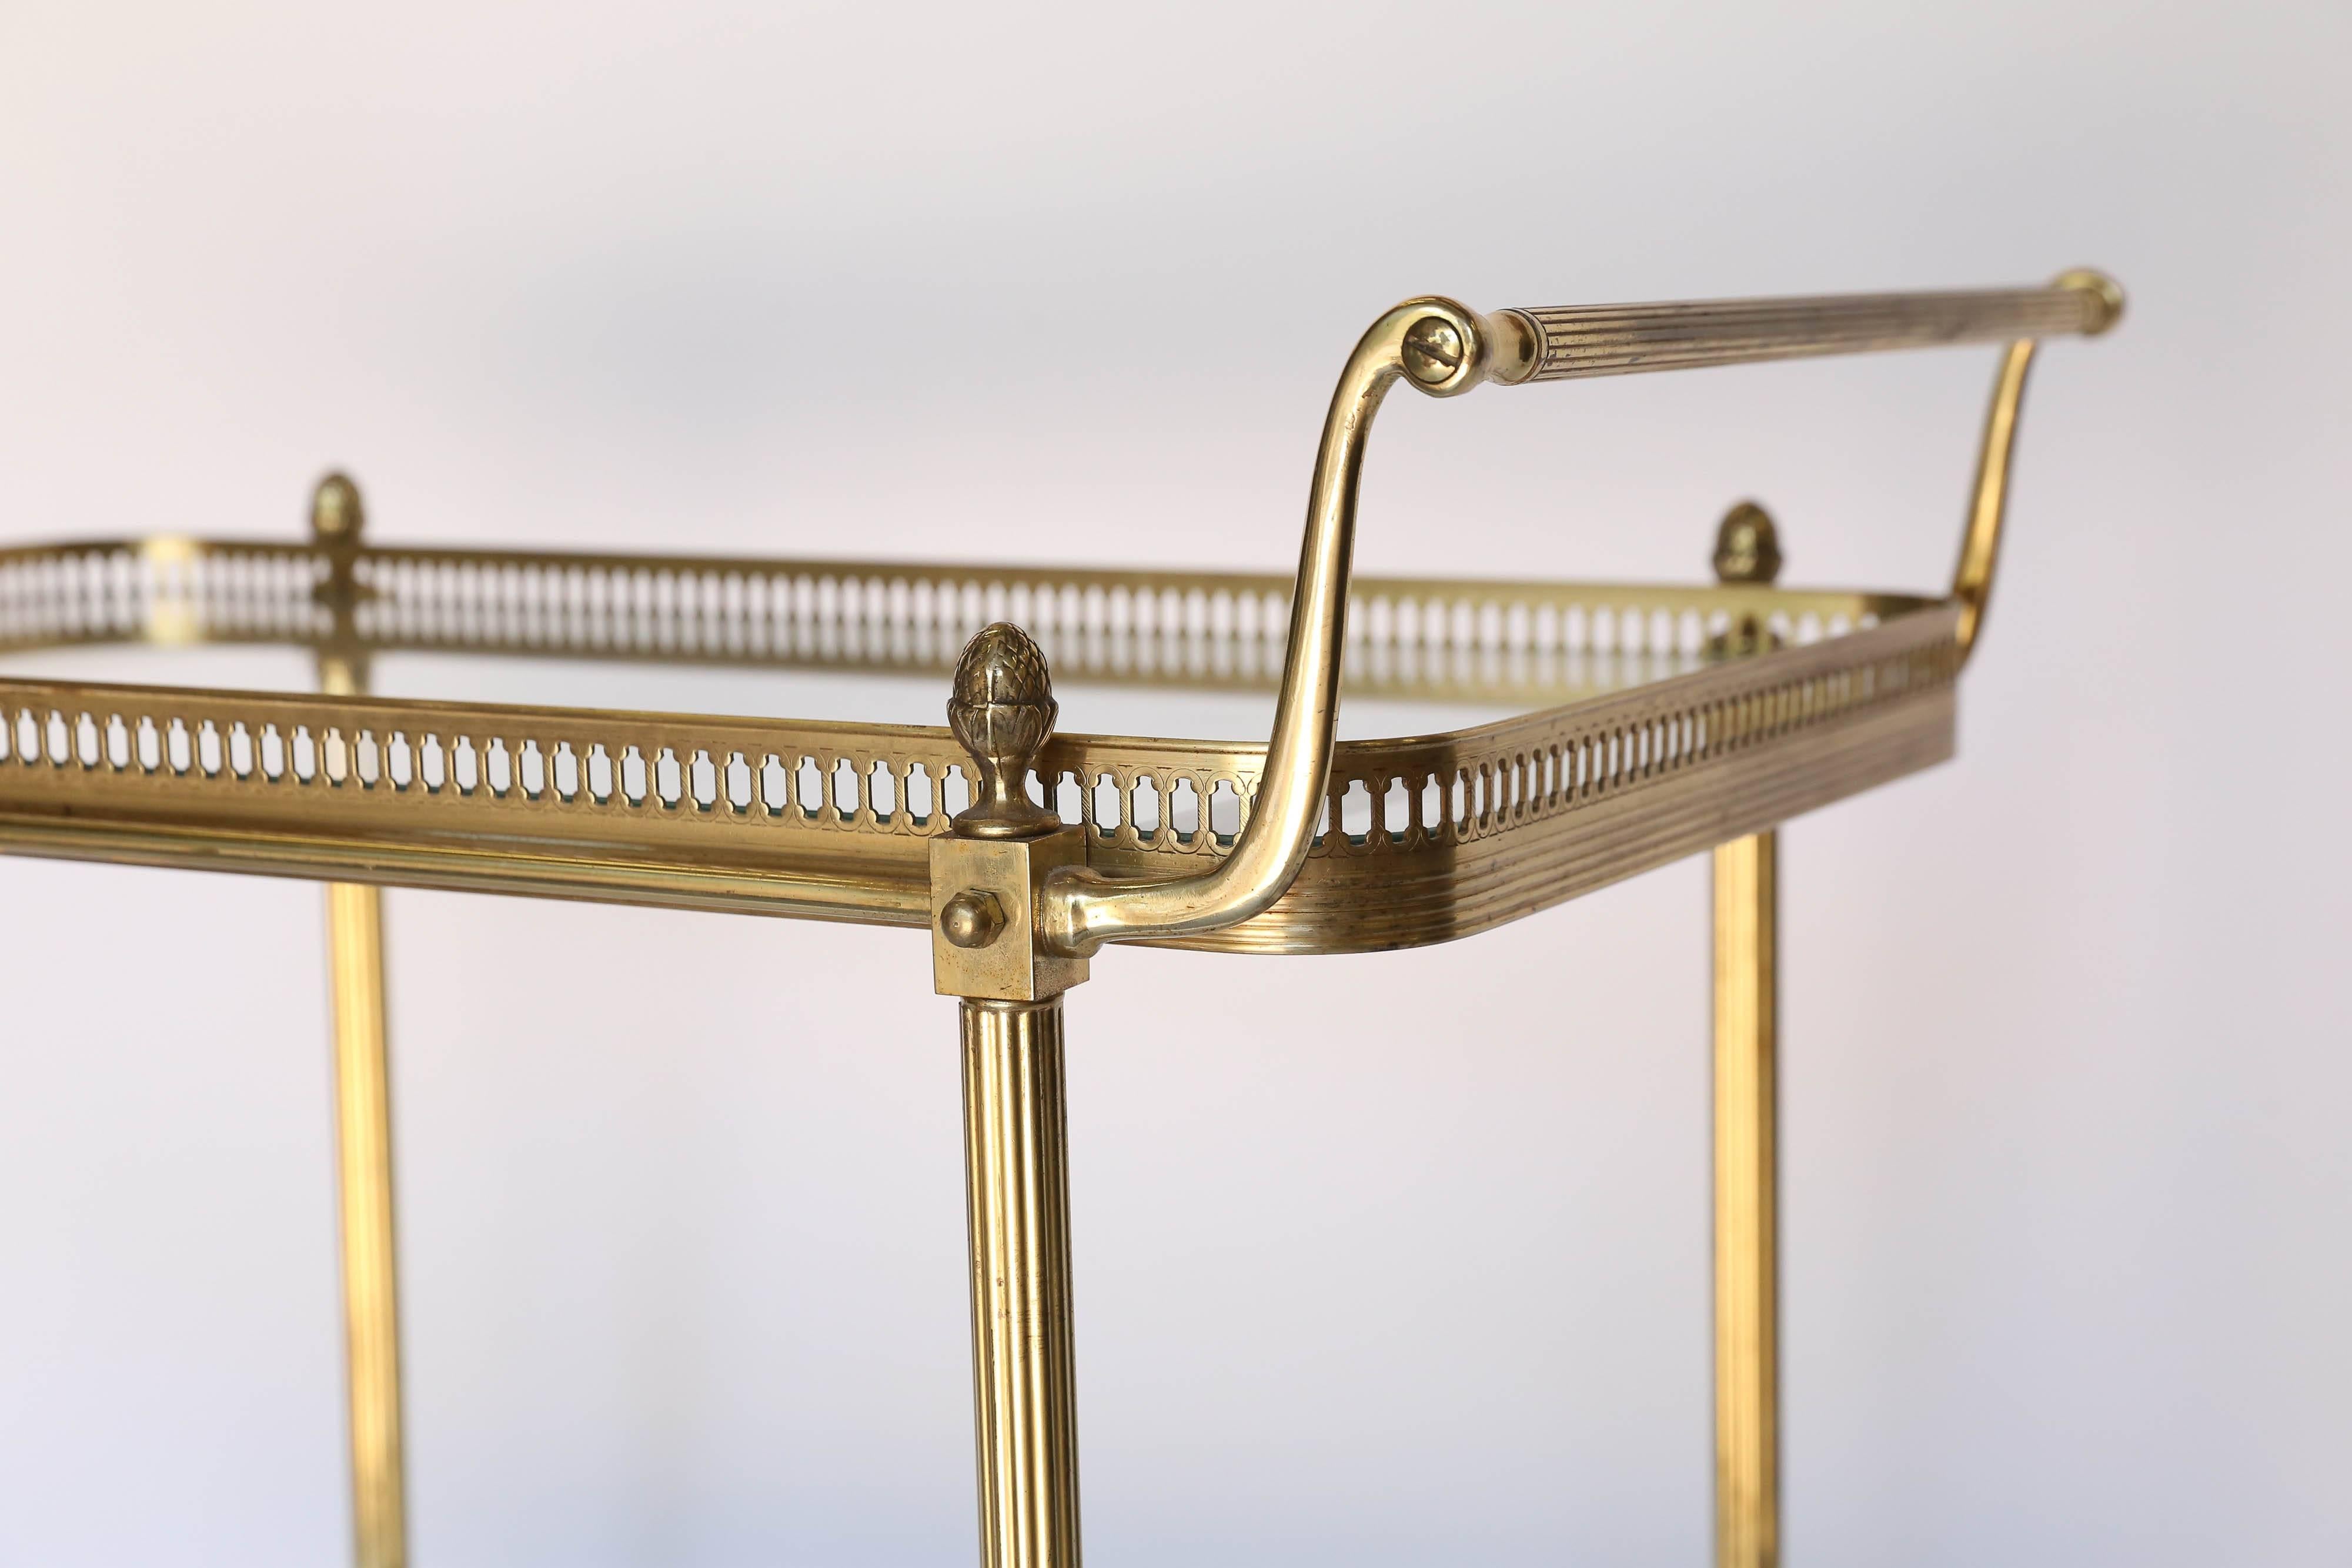 Vintage brass two-tier rolling bar cart constructed with two glass shelves and beautiful brass wheels for easy transport. Display your vintage glassware or serve your favorite cocktails and desserts.